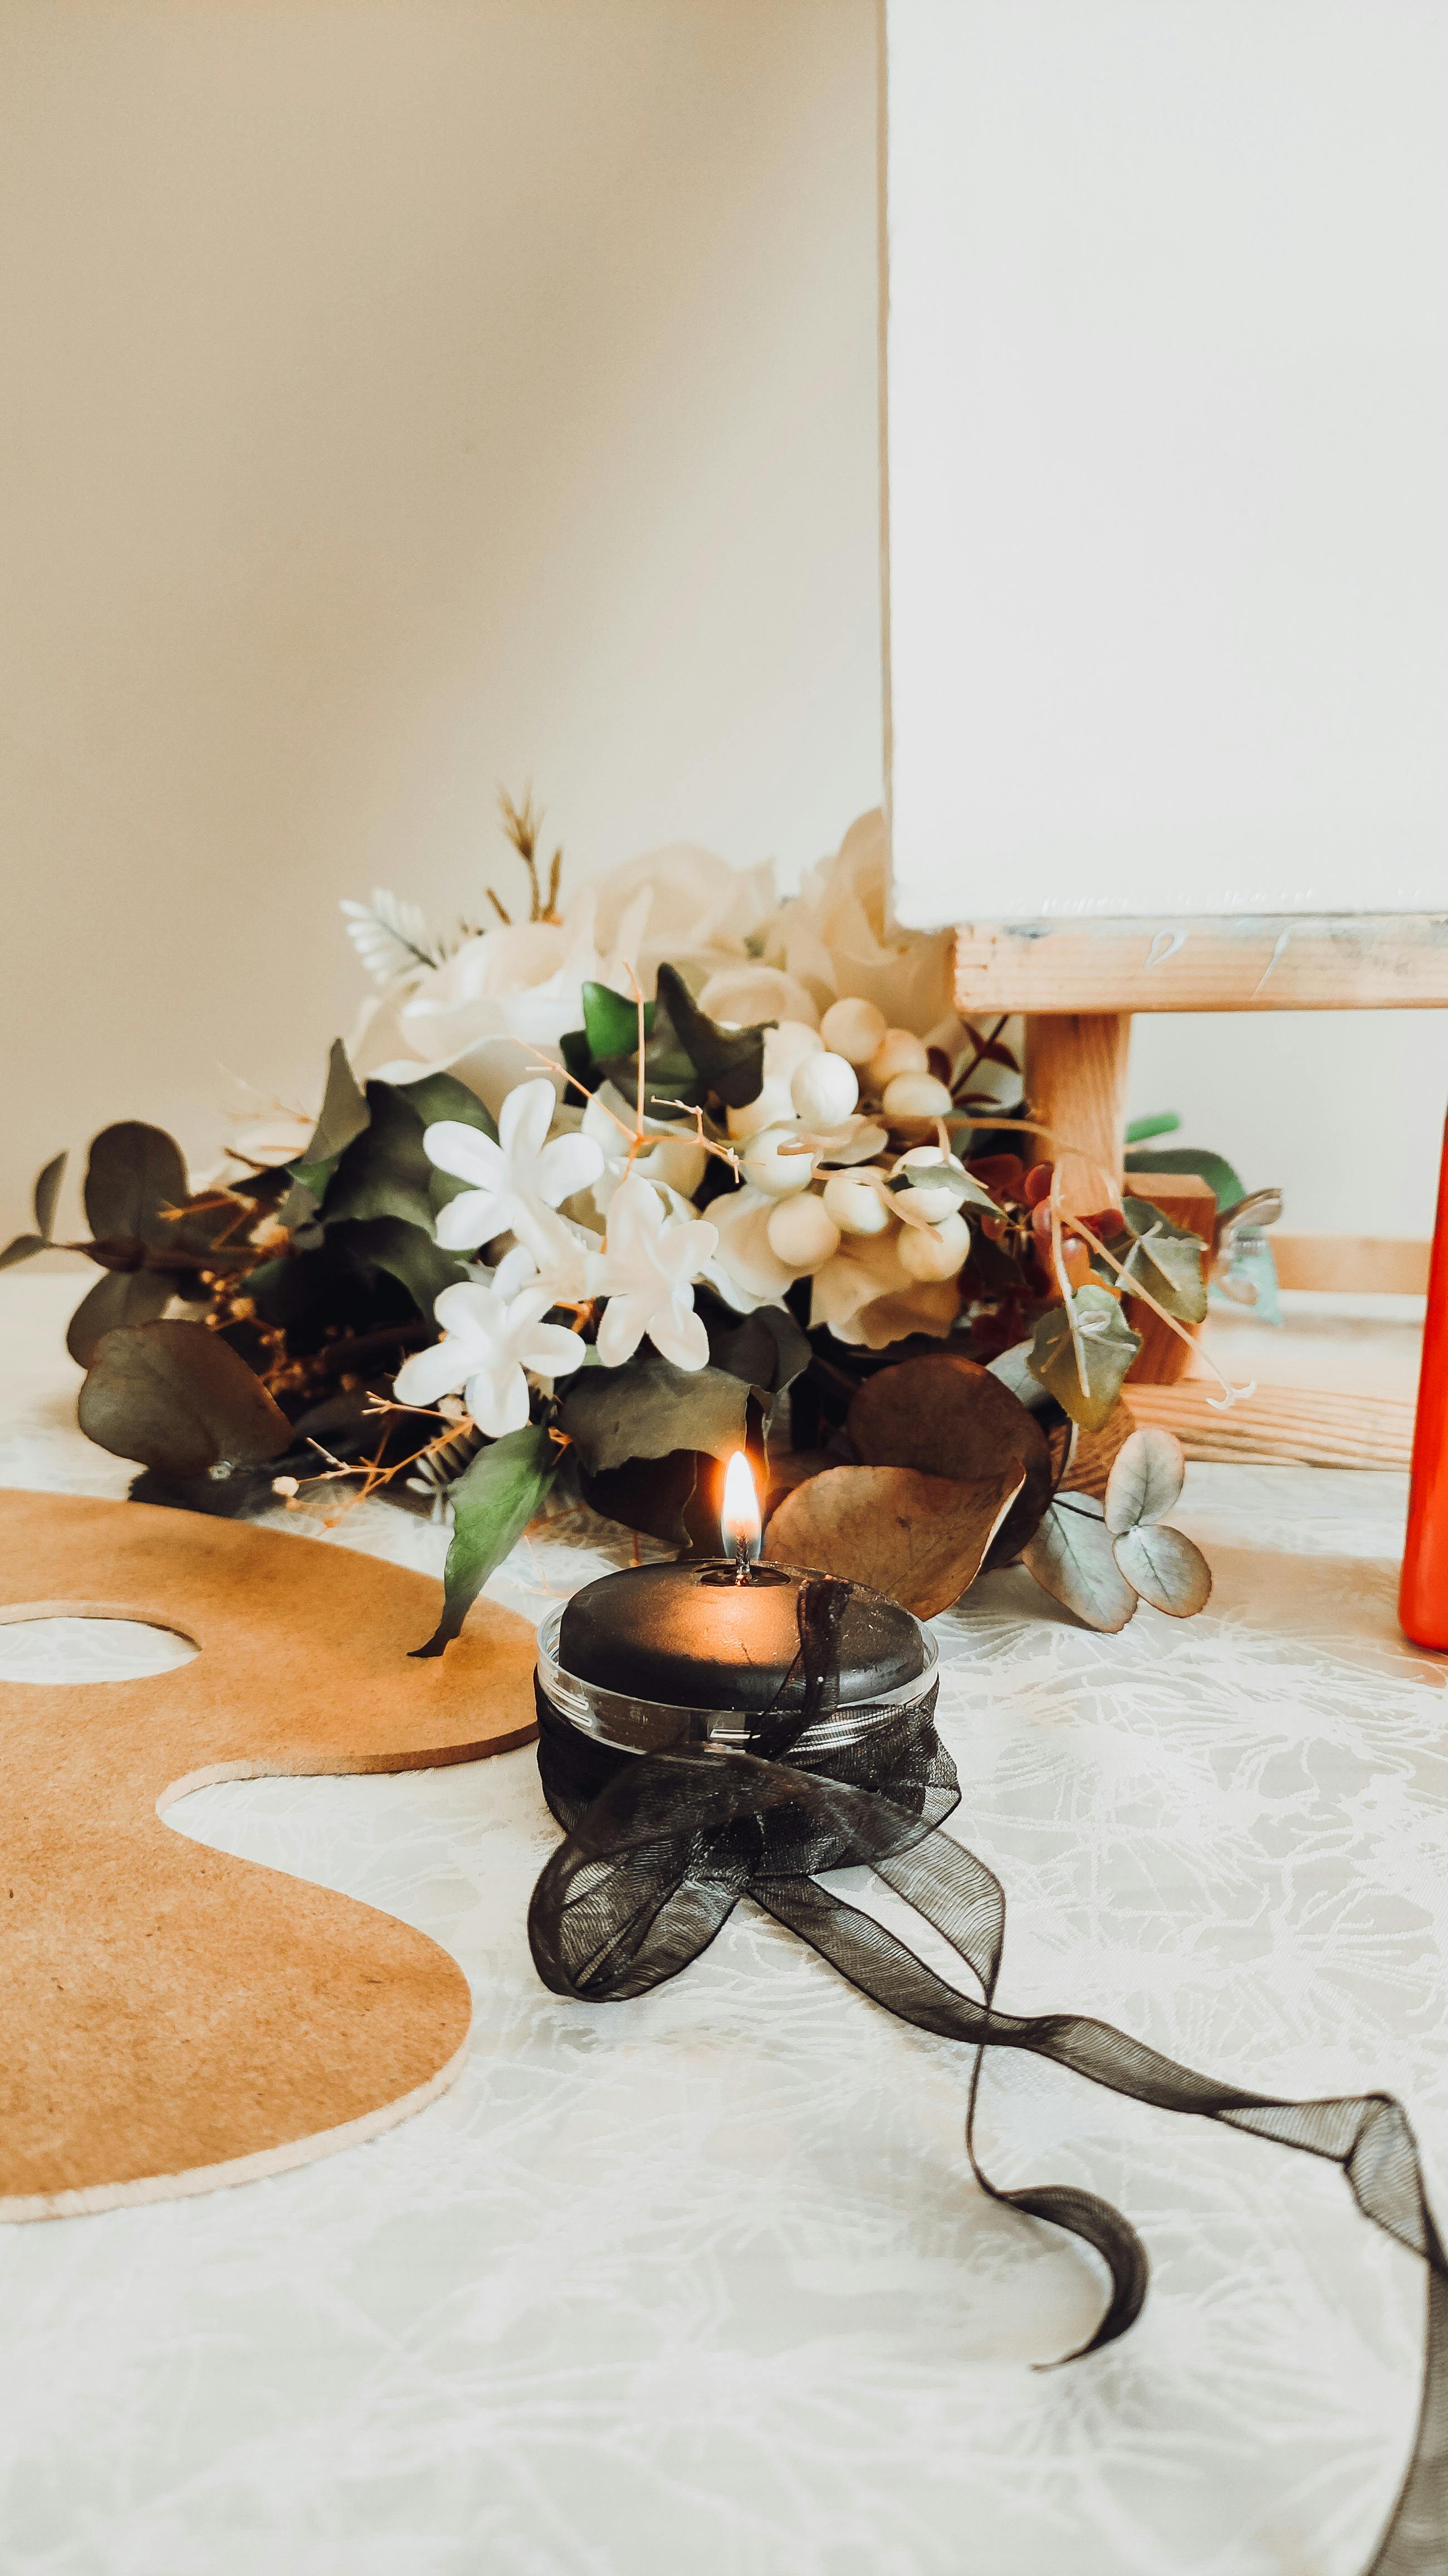 A Candle and Flowers · Free Stock Photo